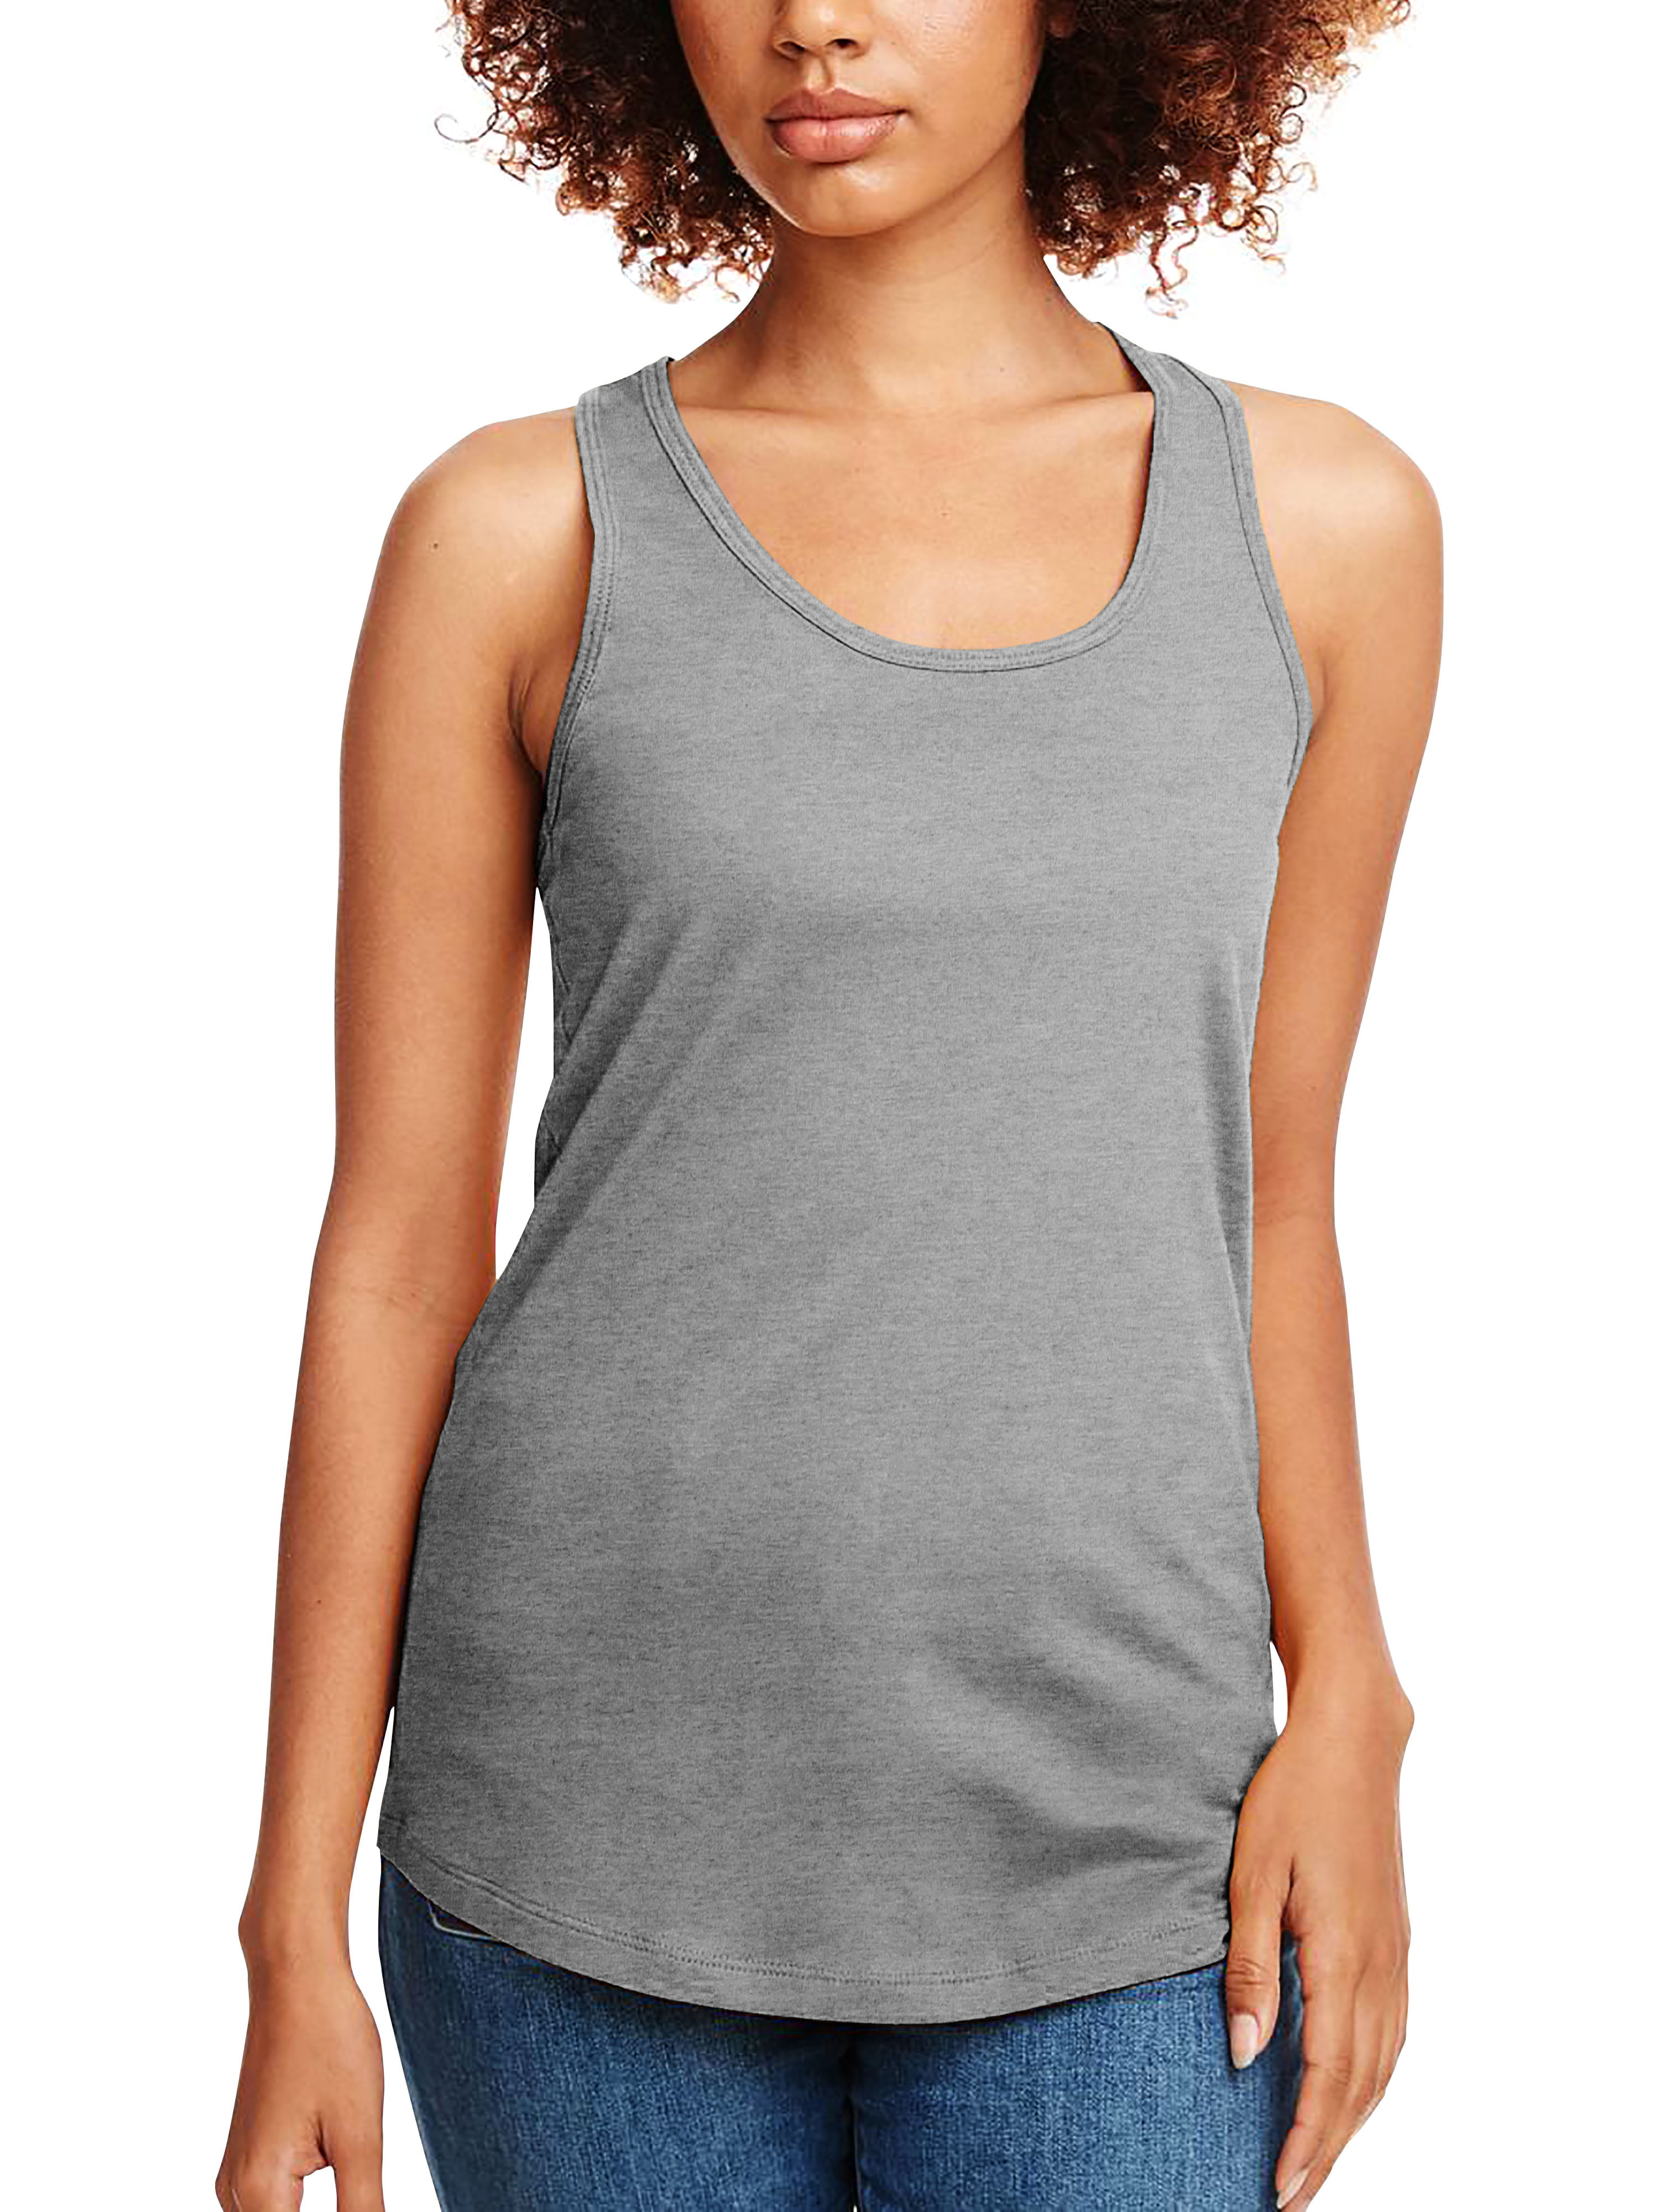 CASUAL TANK TOP TRI-BLEND LONGER LENGTH XS-2XL PRE-WASHED LADIES LIGHTWEIGHT 